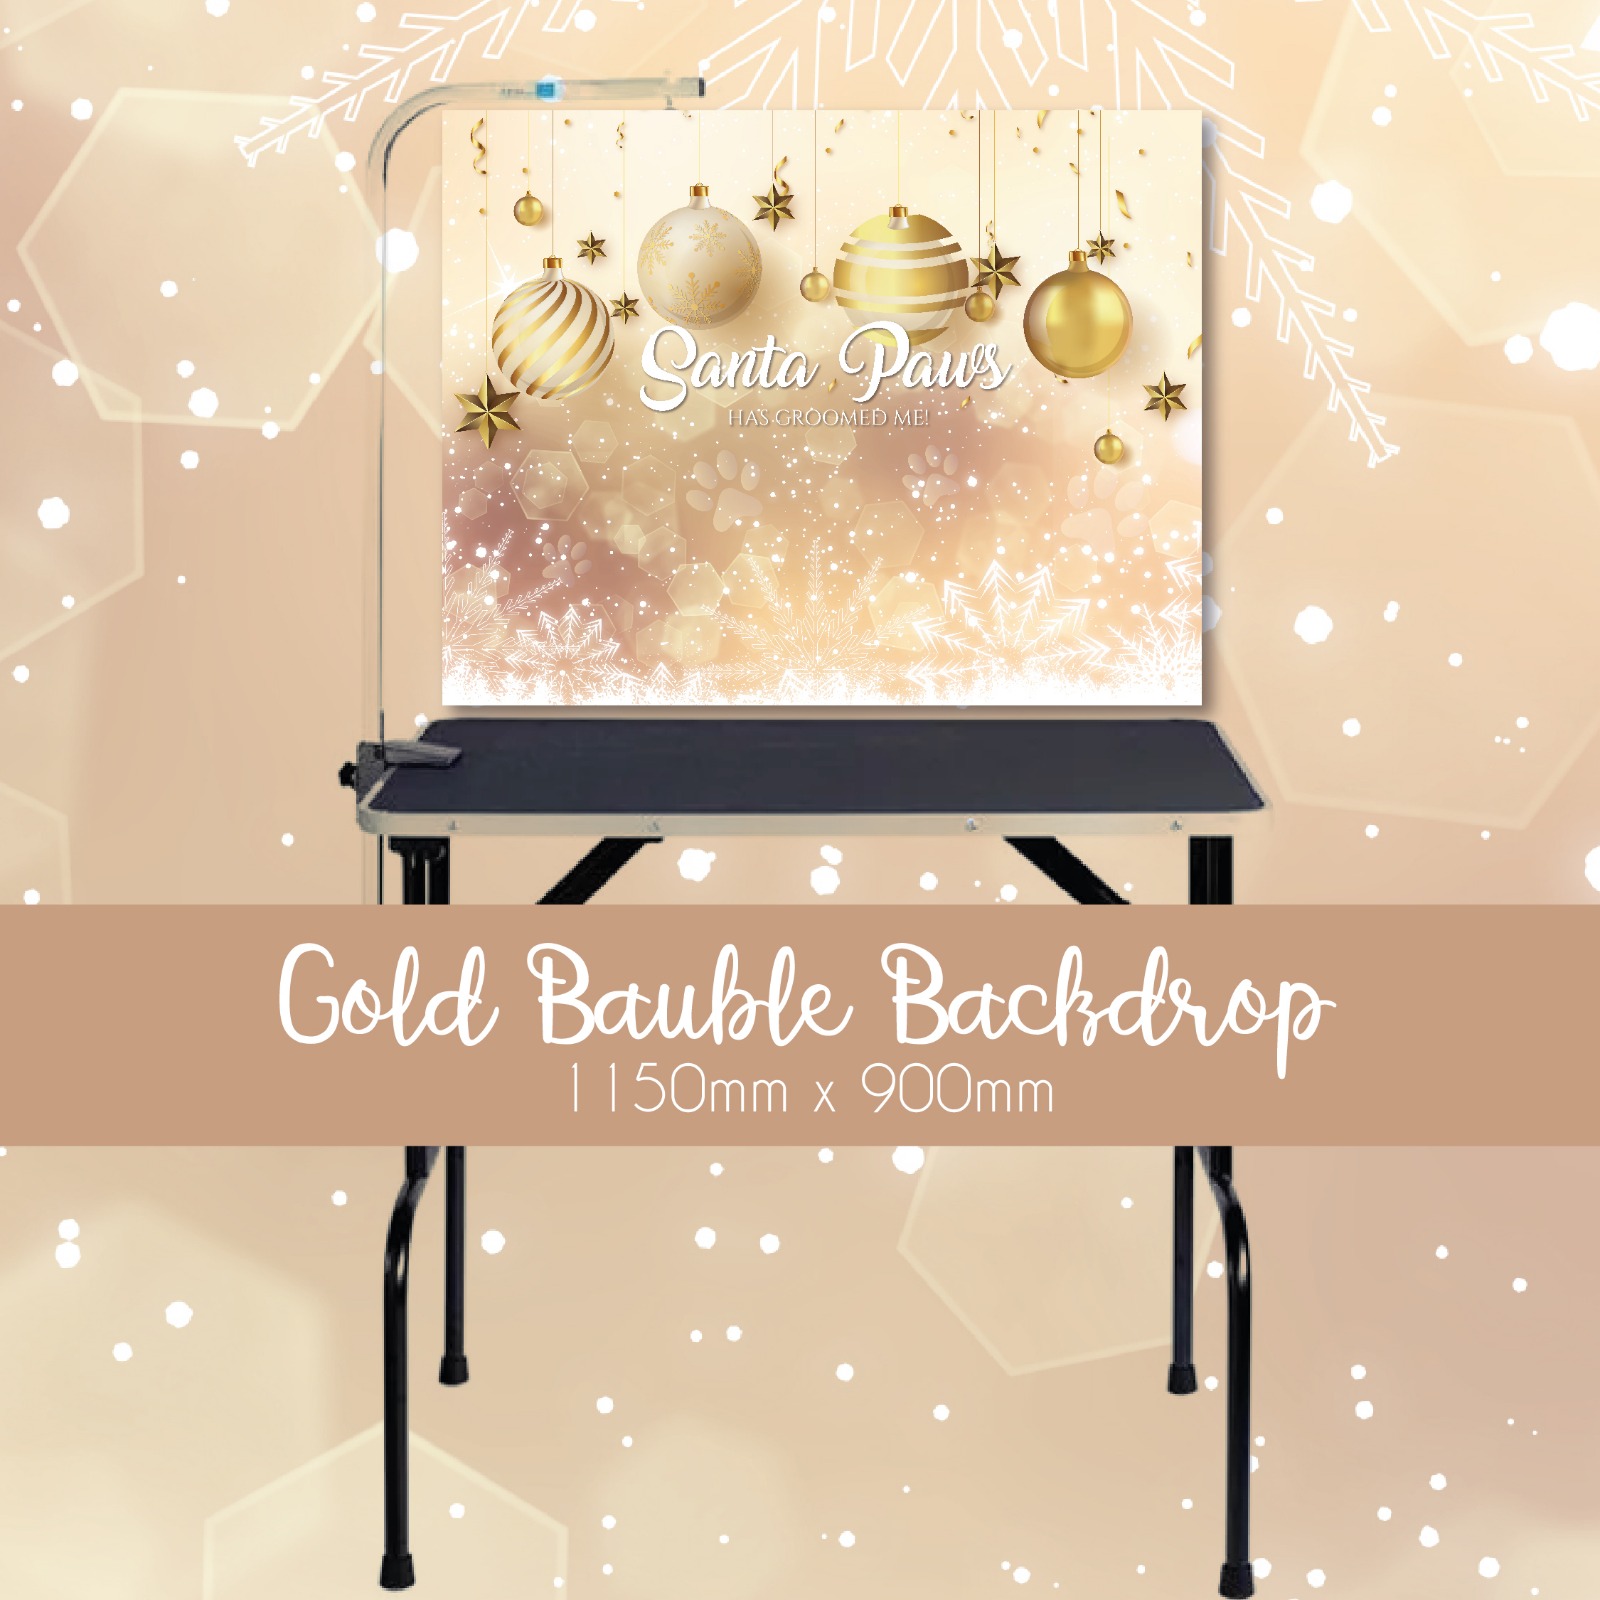 Gold Bauble Backdrop